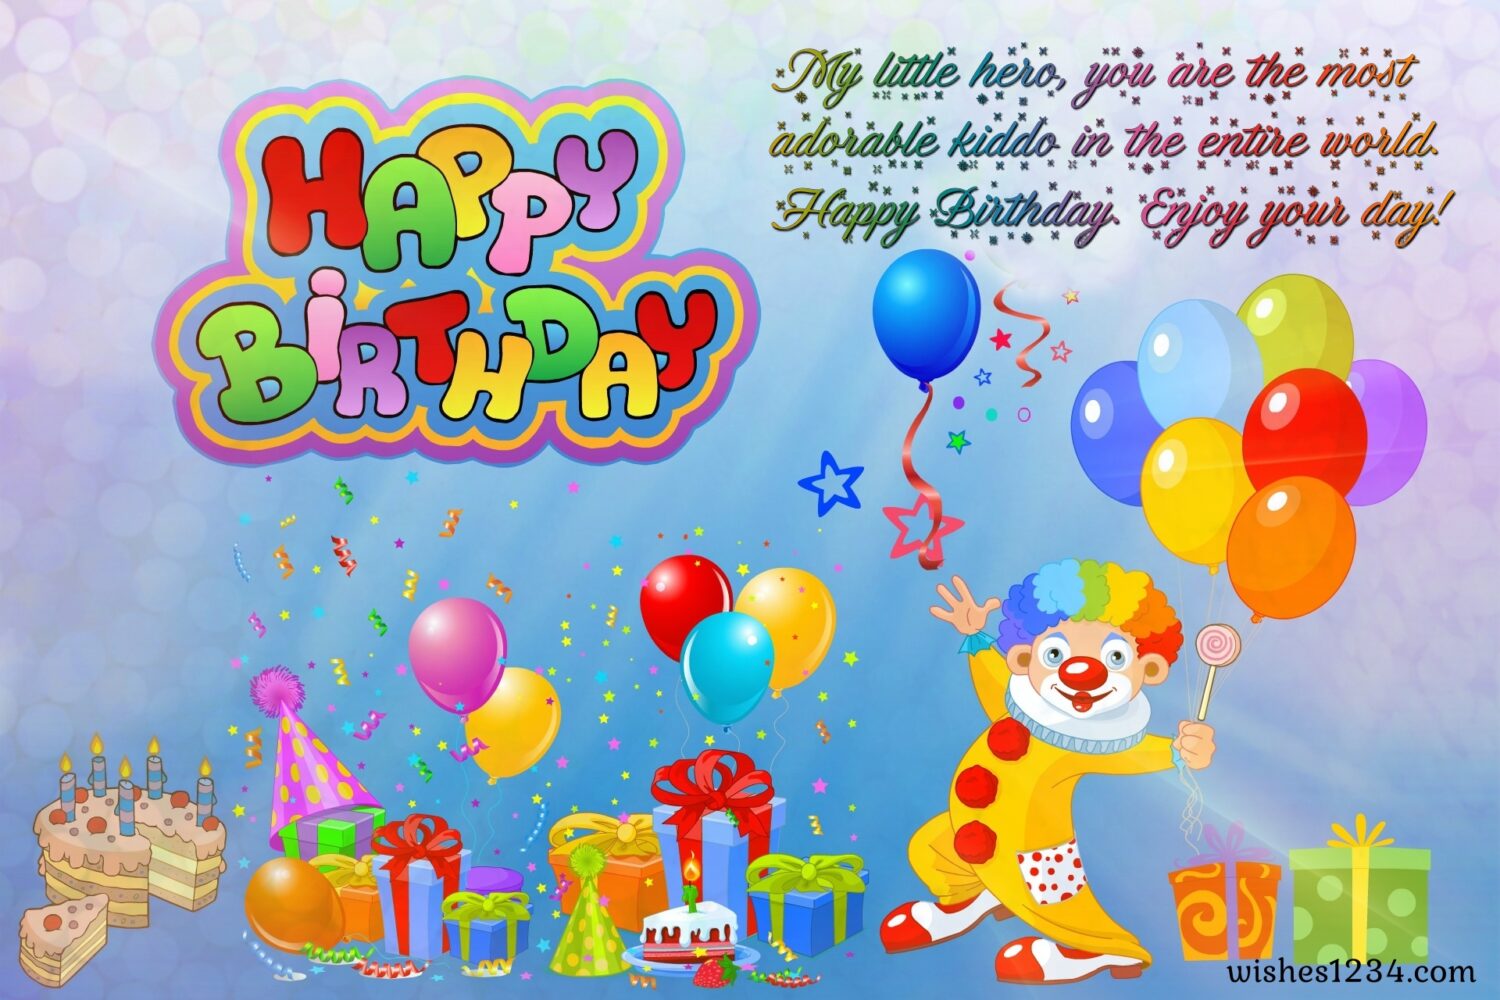 Clown with lot of gifts and balloons, Kids birthday | Happy Birthday wishes for kids.